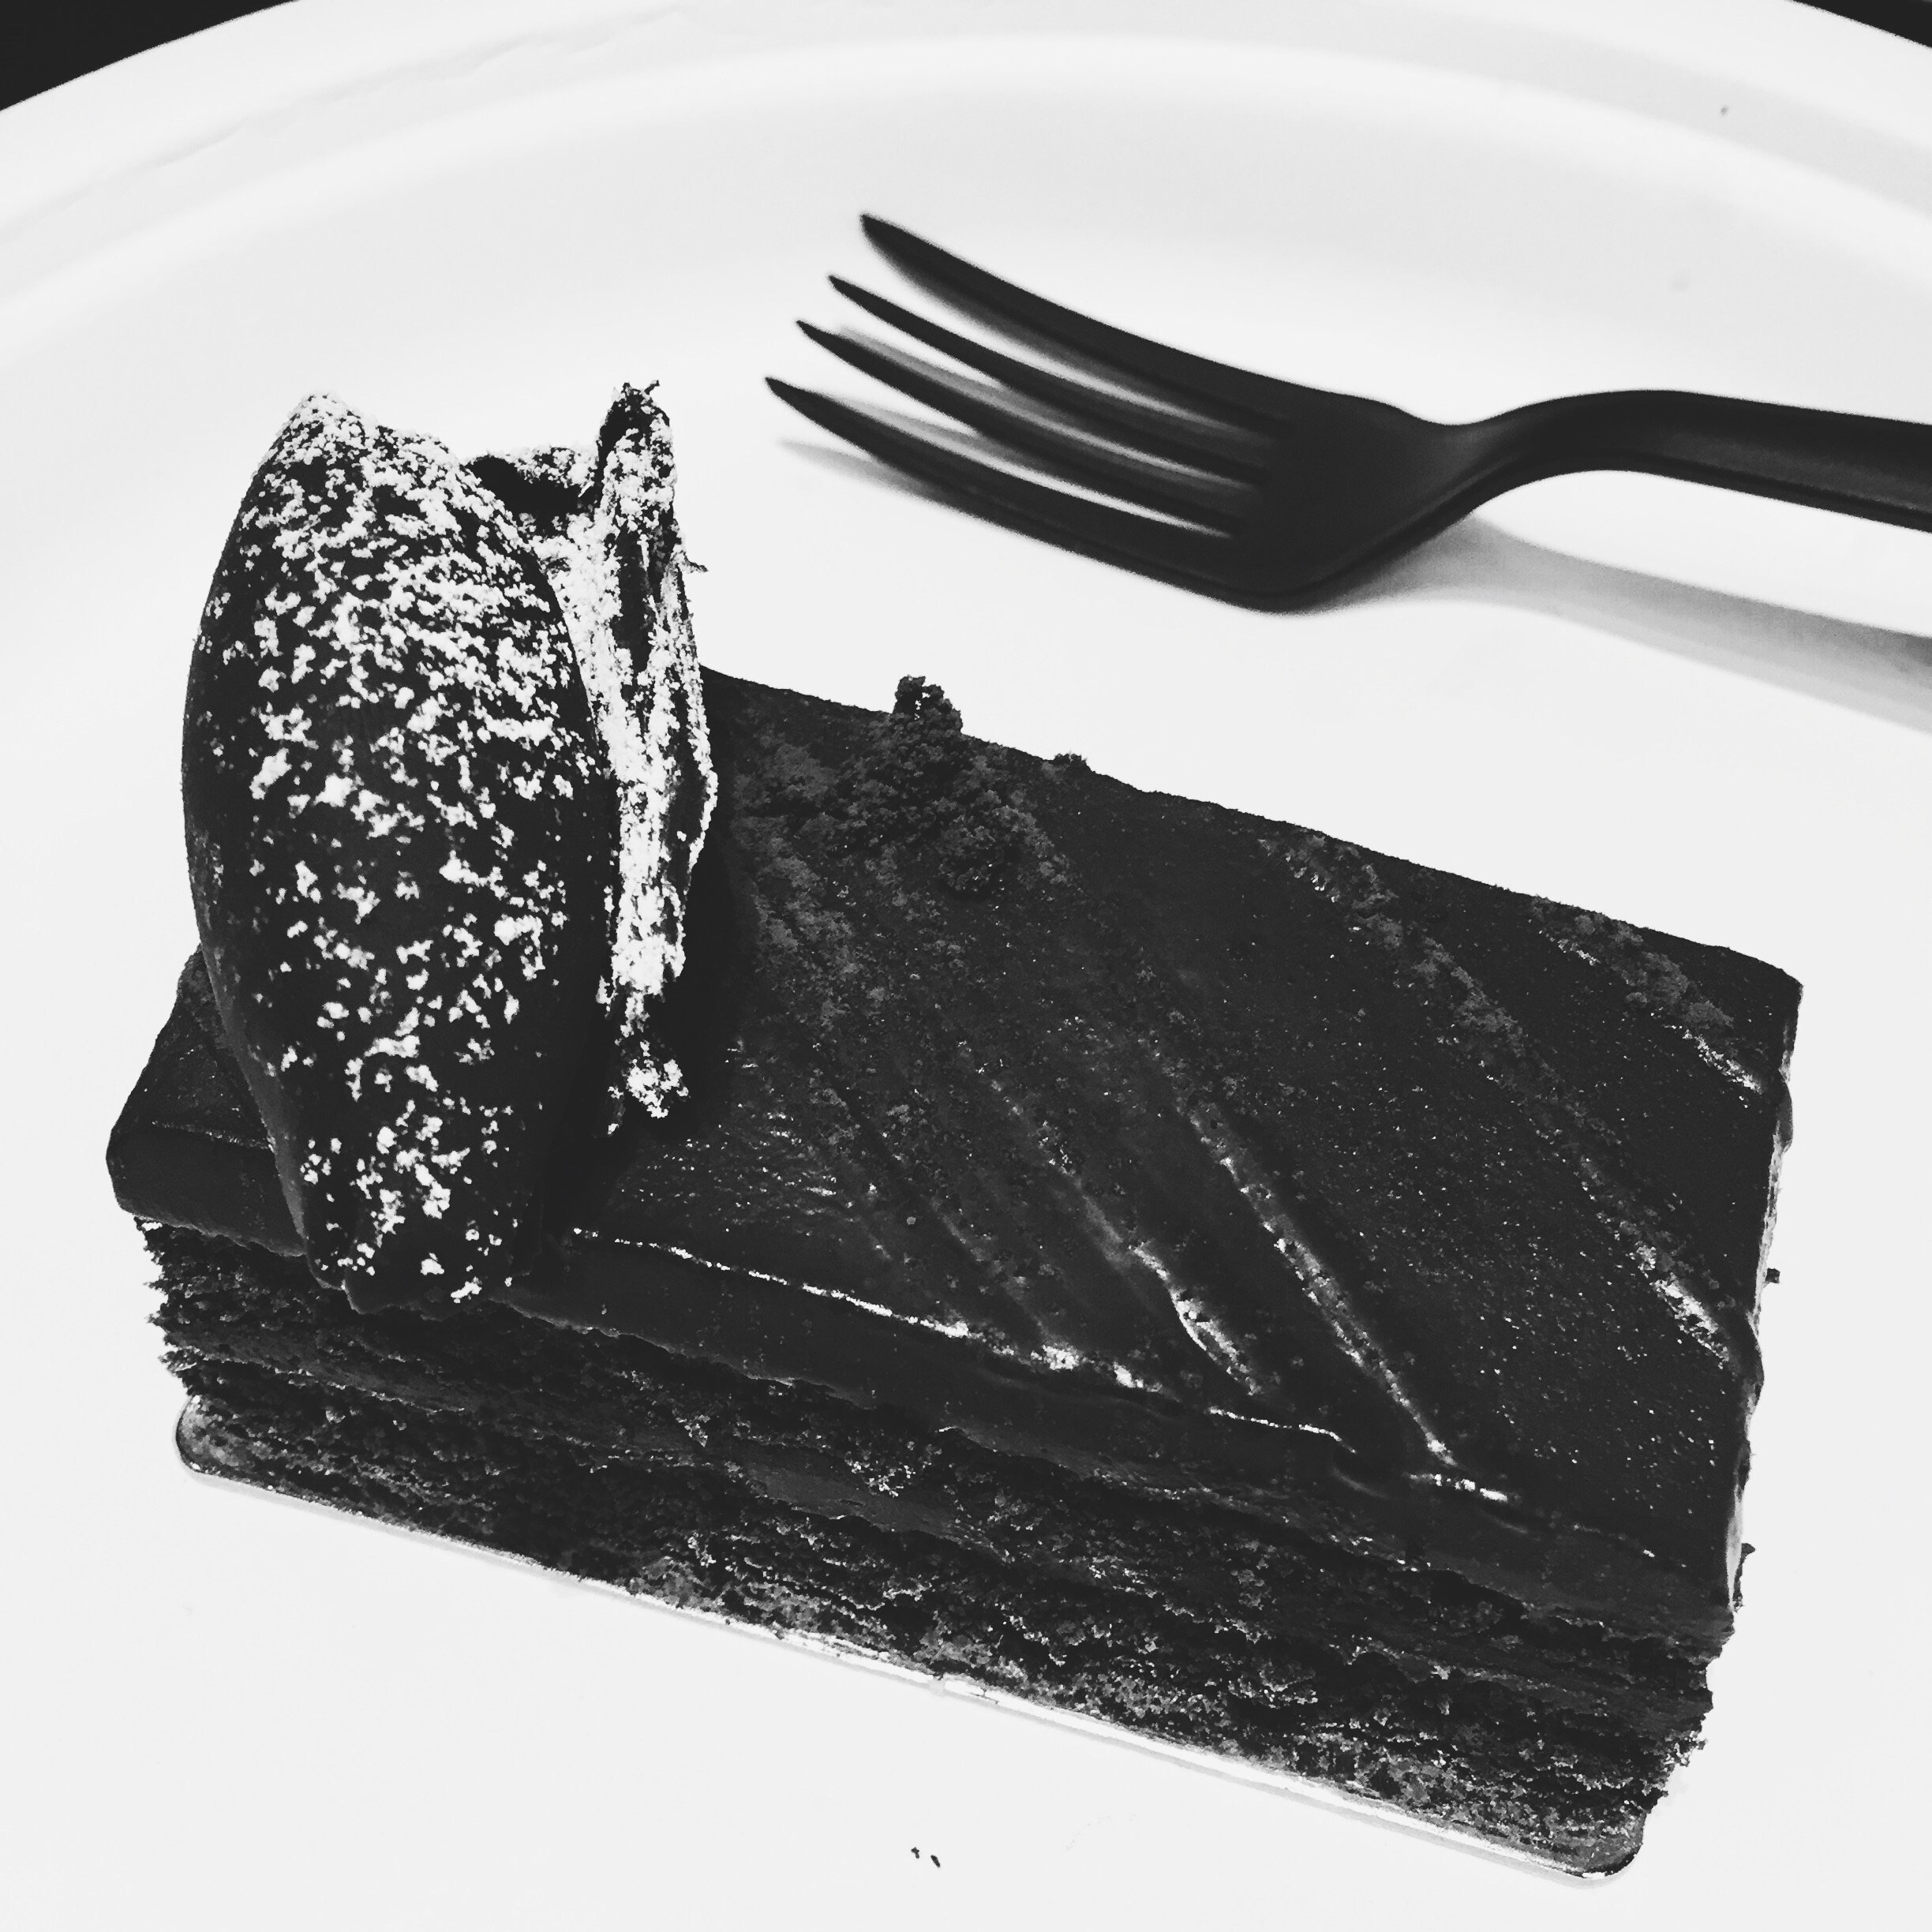 The most delicious chocolate cake